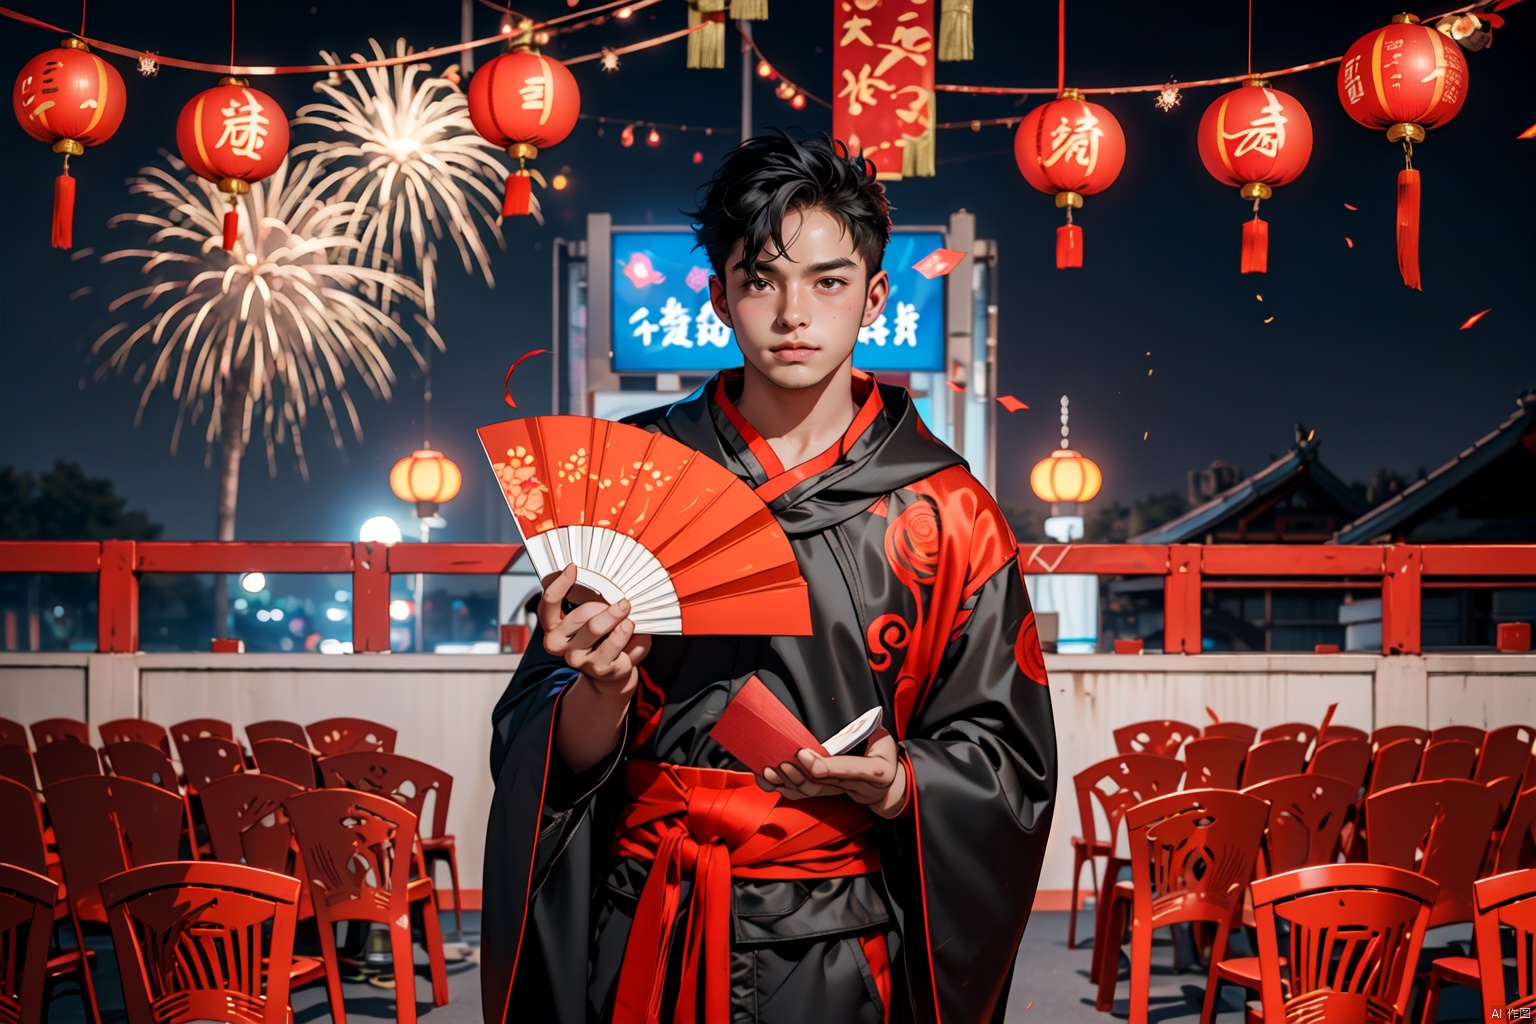  1boy, Arso,Lovely boy, Chinese black gown, white fan, fan in hand, China New Year in the background, red envelopes, firecrackers, gufeng, Night scene